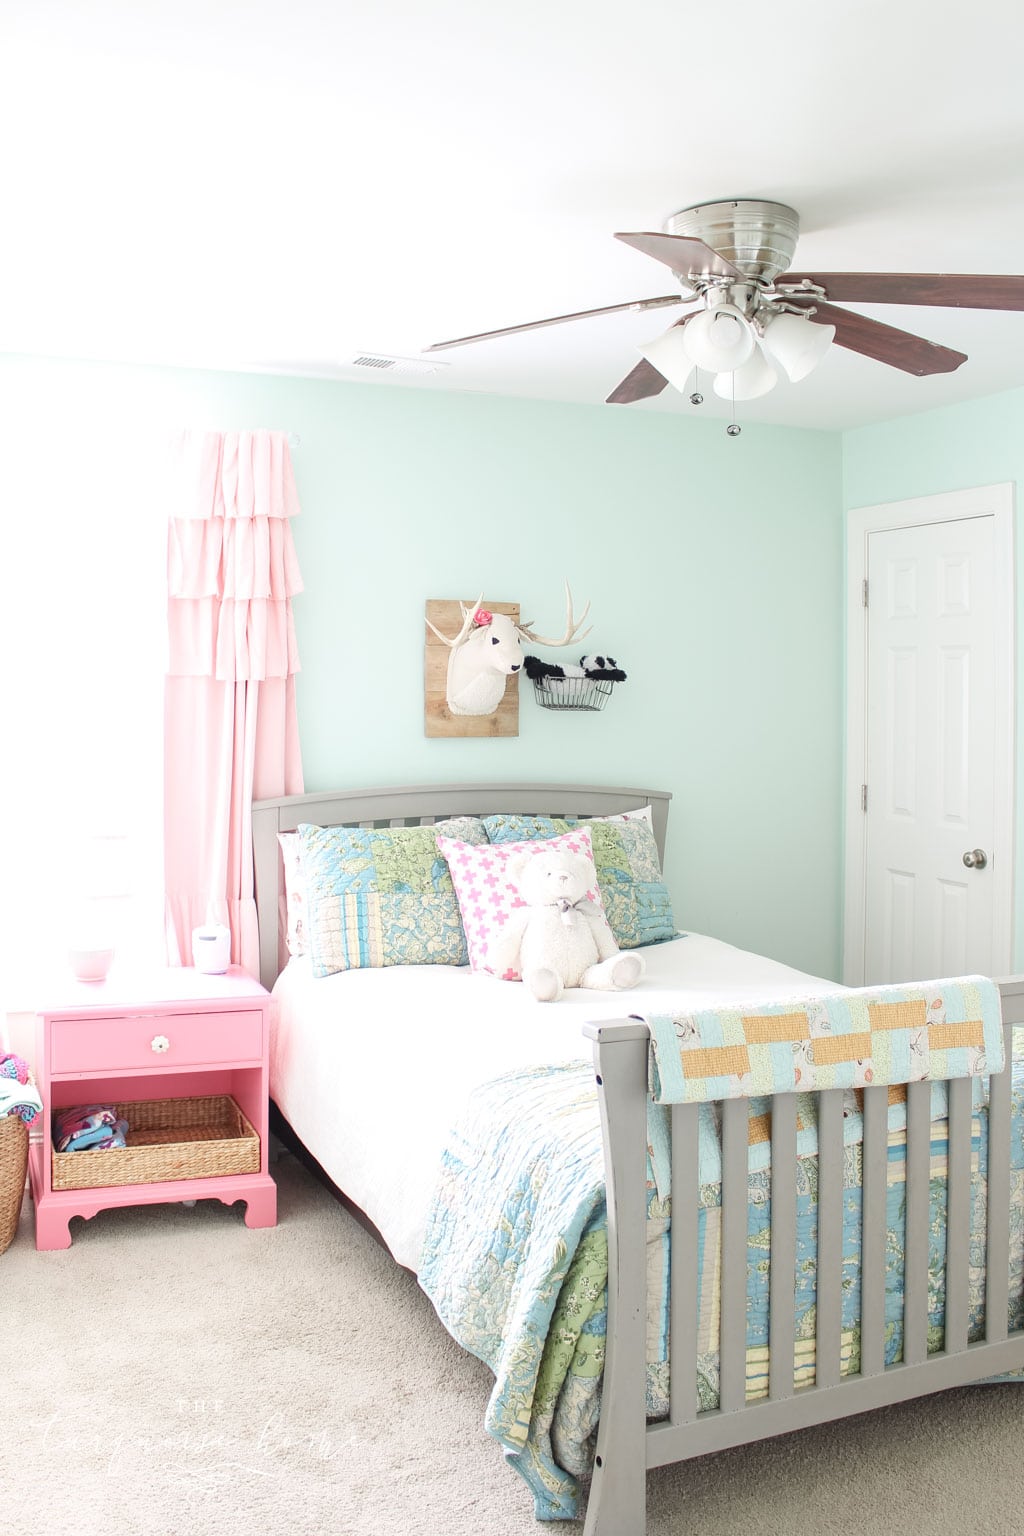 Rooms decor ideas for girls | girls bedroom ideas | turquoise and pink girls bedroom decor